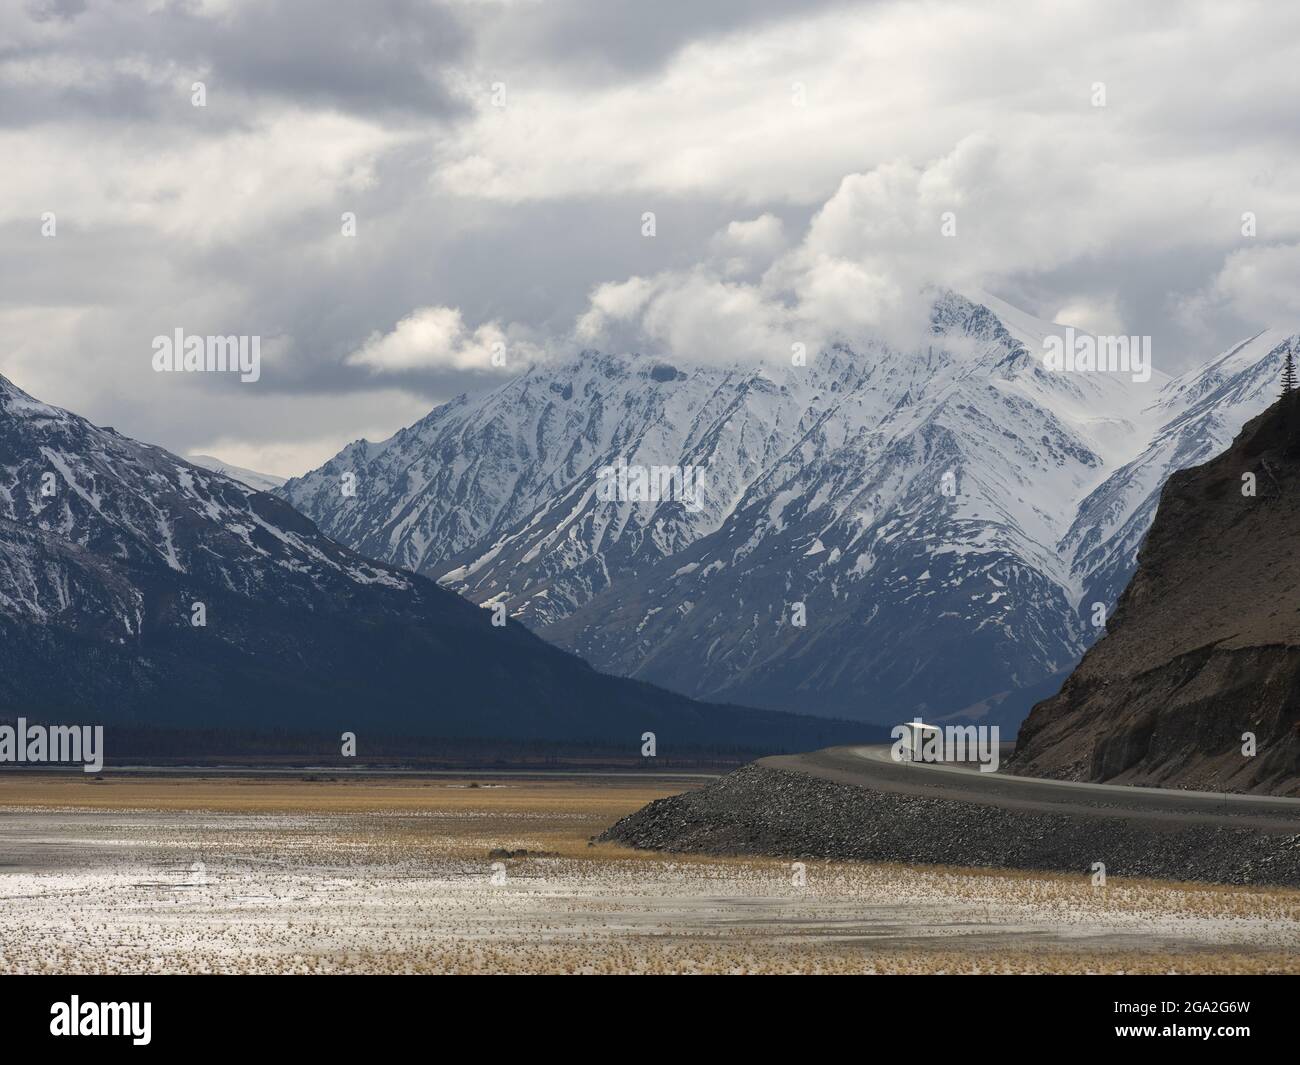 Transport truck driving the Alaska Highway along side the dried up portion of Kluane Lake with huge mountains in the distance, situated in the Trad... Stock Photo